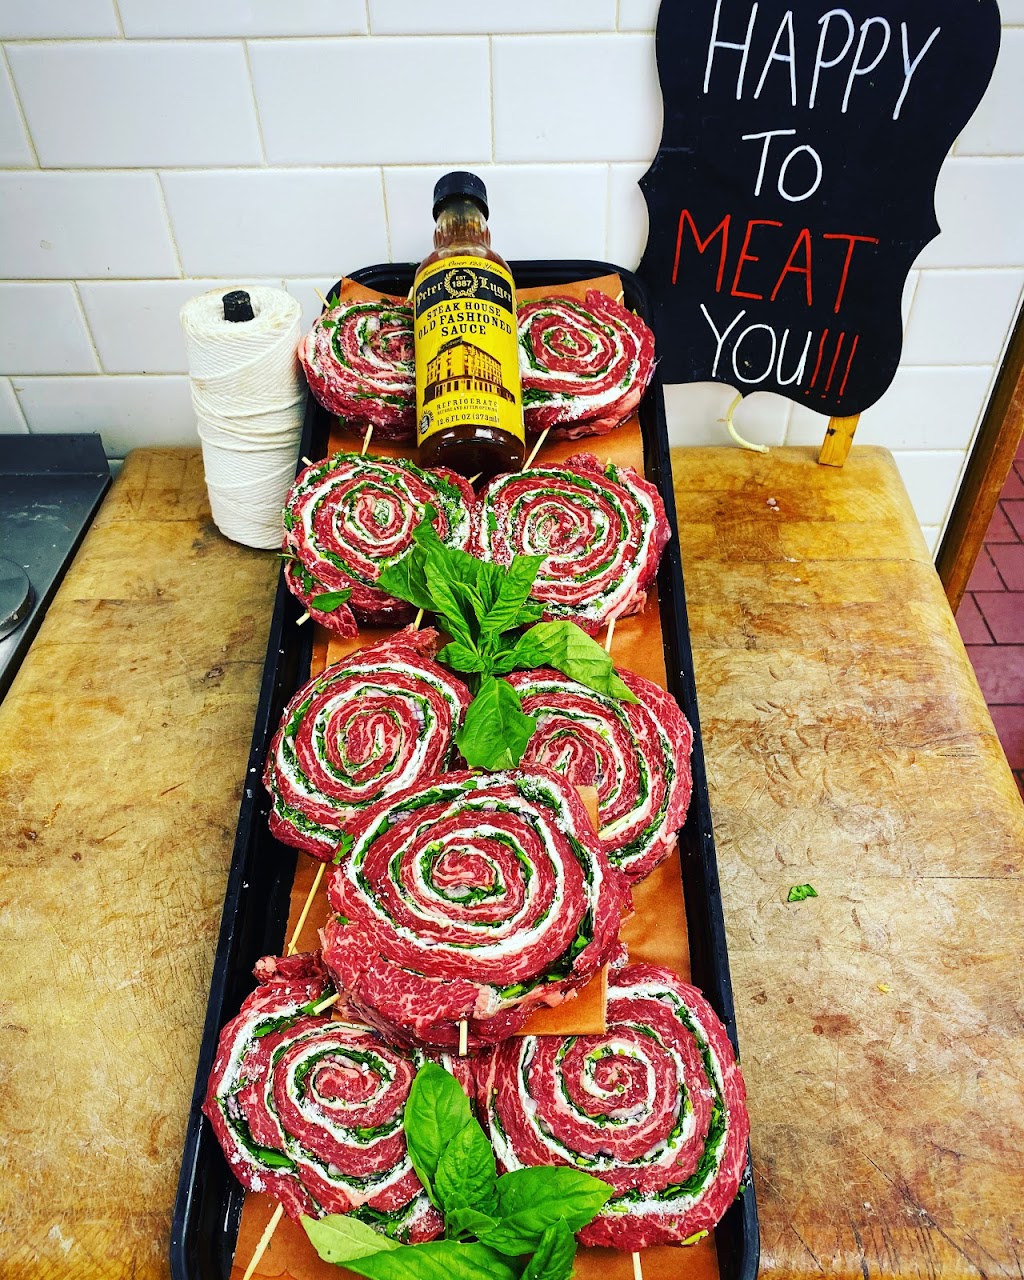 Sons of a butcher | 13 1/2 Brower Ave, Oceanside, NY 11572 | Phone: (516) 764-4589